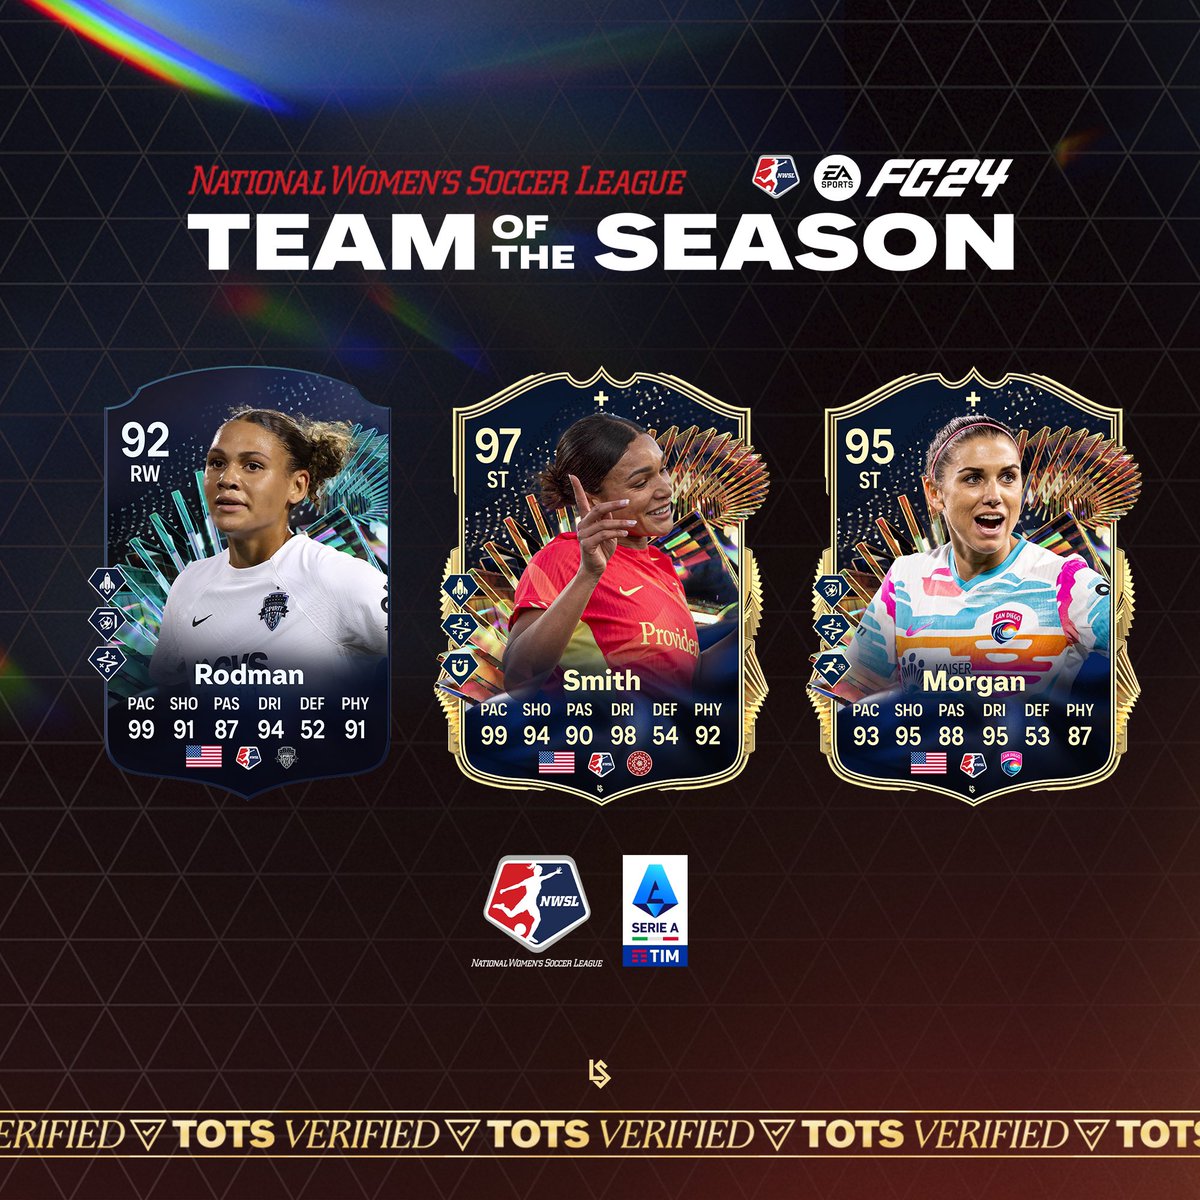 I’m honesty way more hyped for NWSL Tots than Serie A next week 😂
Anyone else wish we could pack them in reds?
#eafc